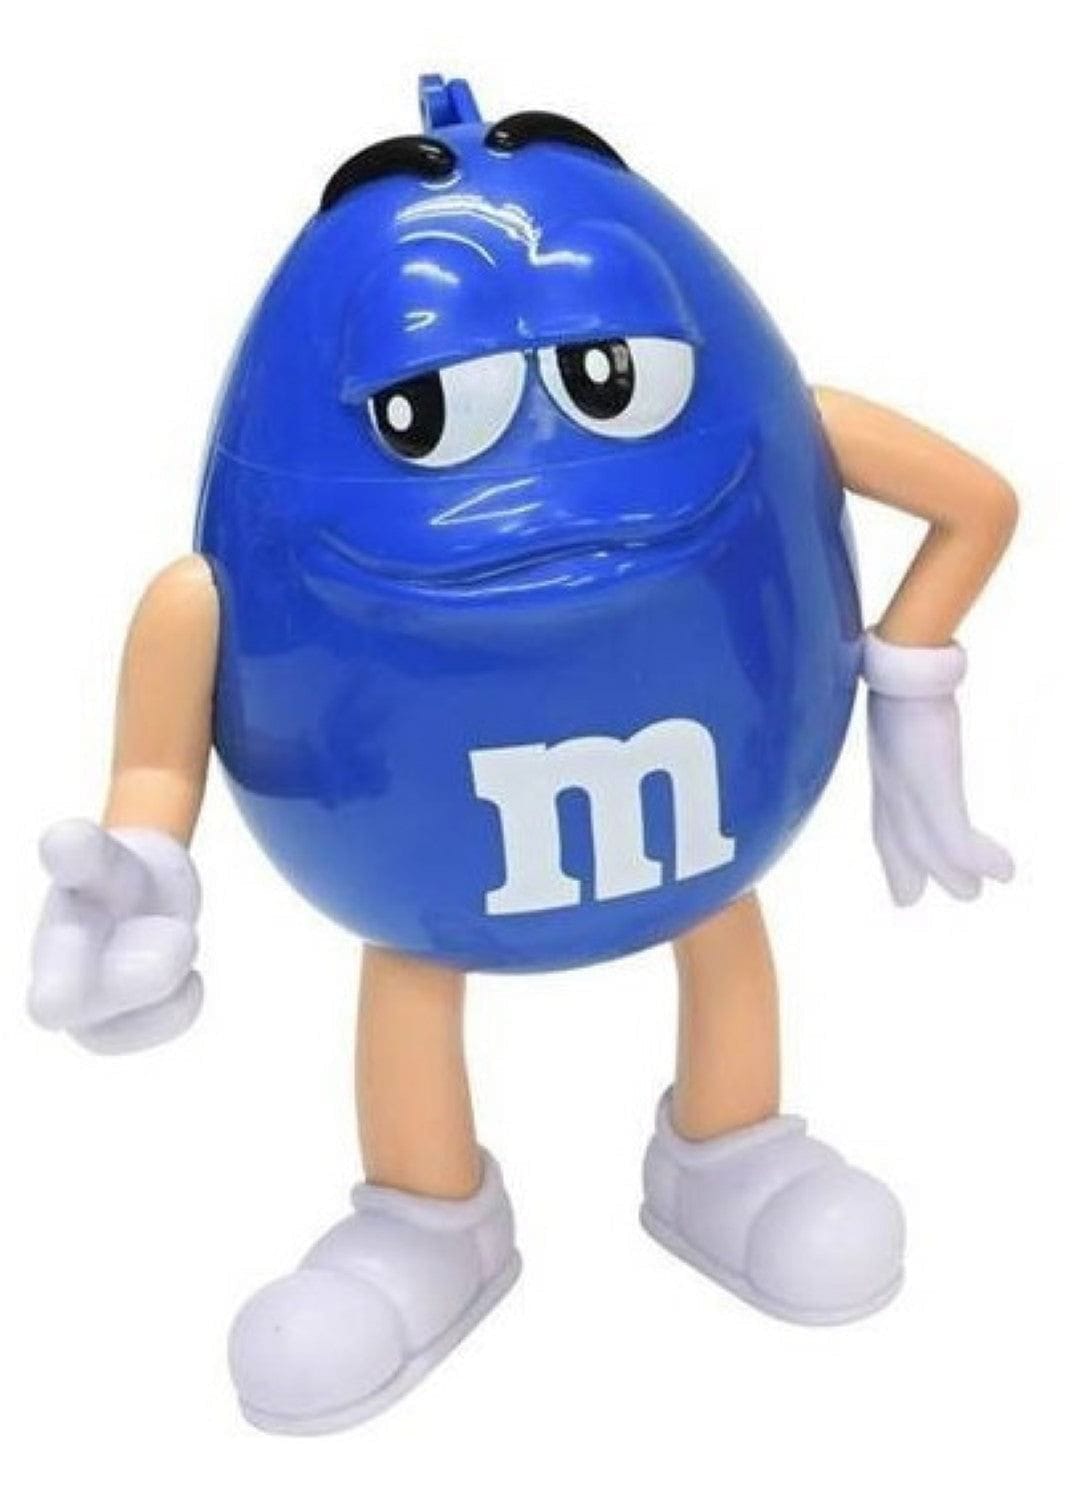 M&M Candy Character- Blue on Wheels w/Metal Base Store Display Height  52” RARE!